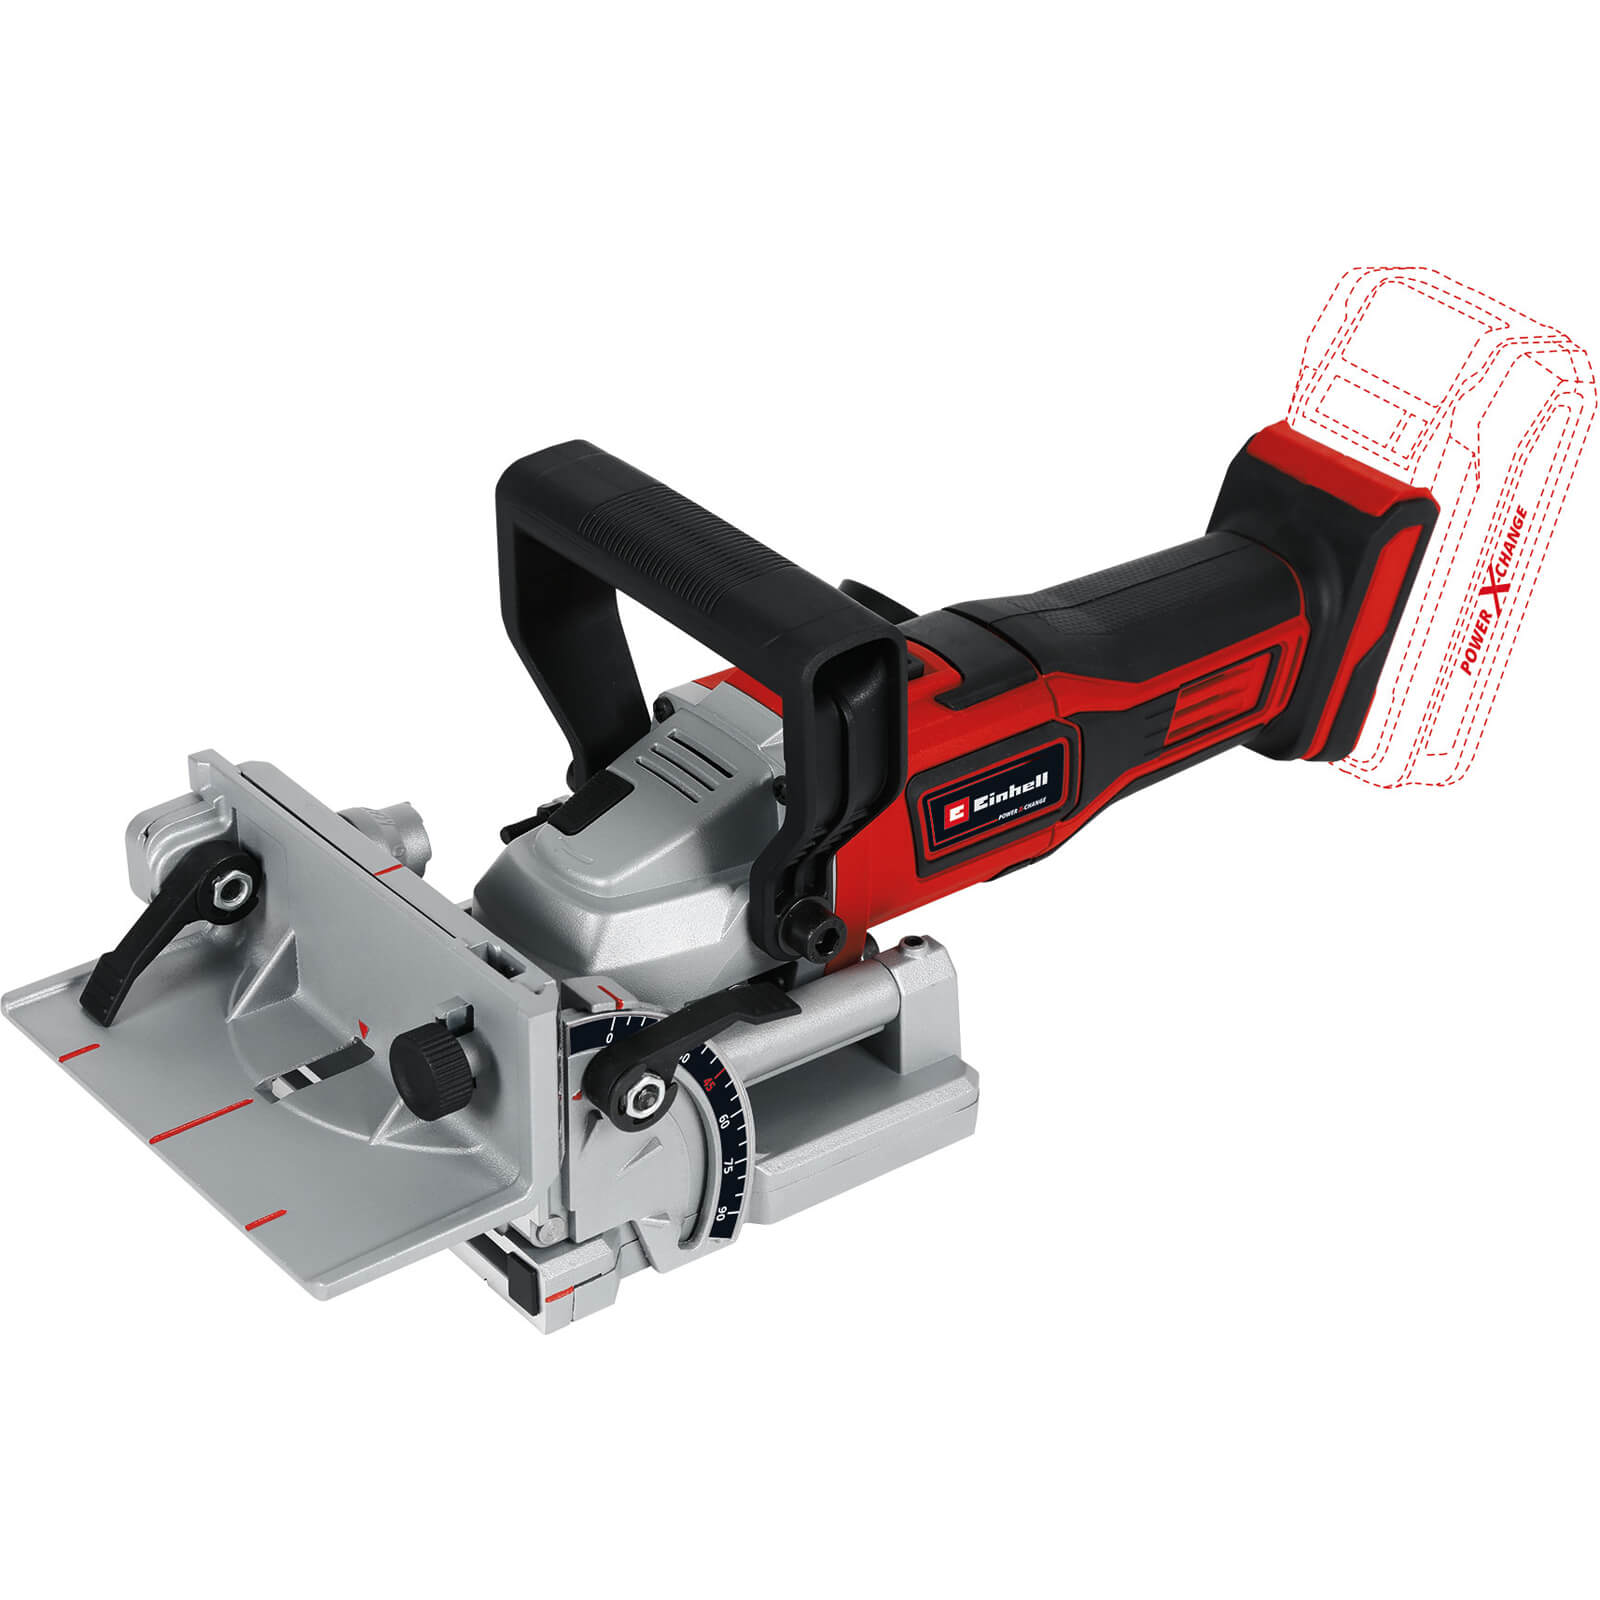 Image of Einhell TE-BJ 18 Li 18v Cordless Biscuit Jointer No Batteries No Charger No Case